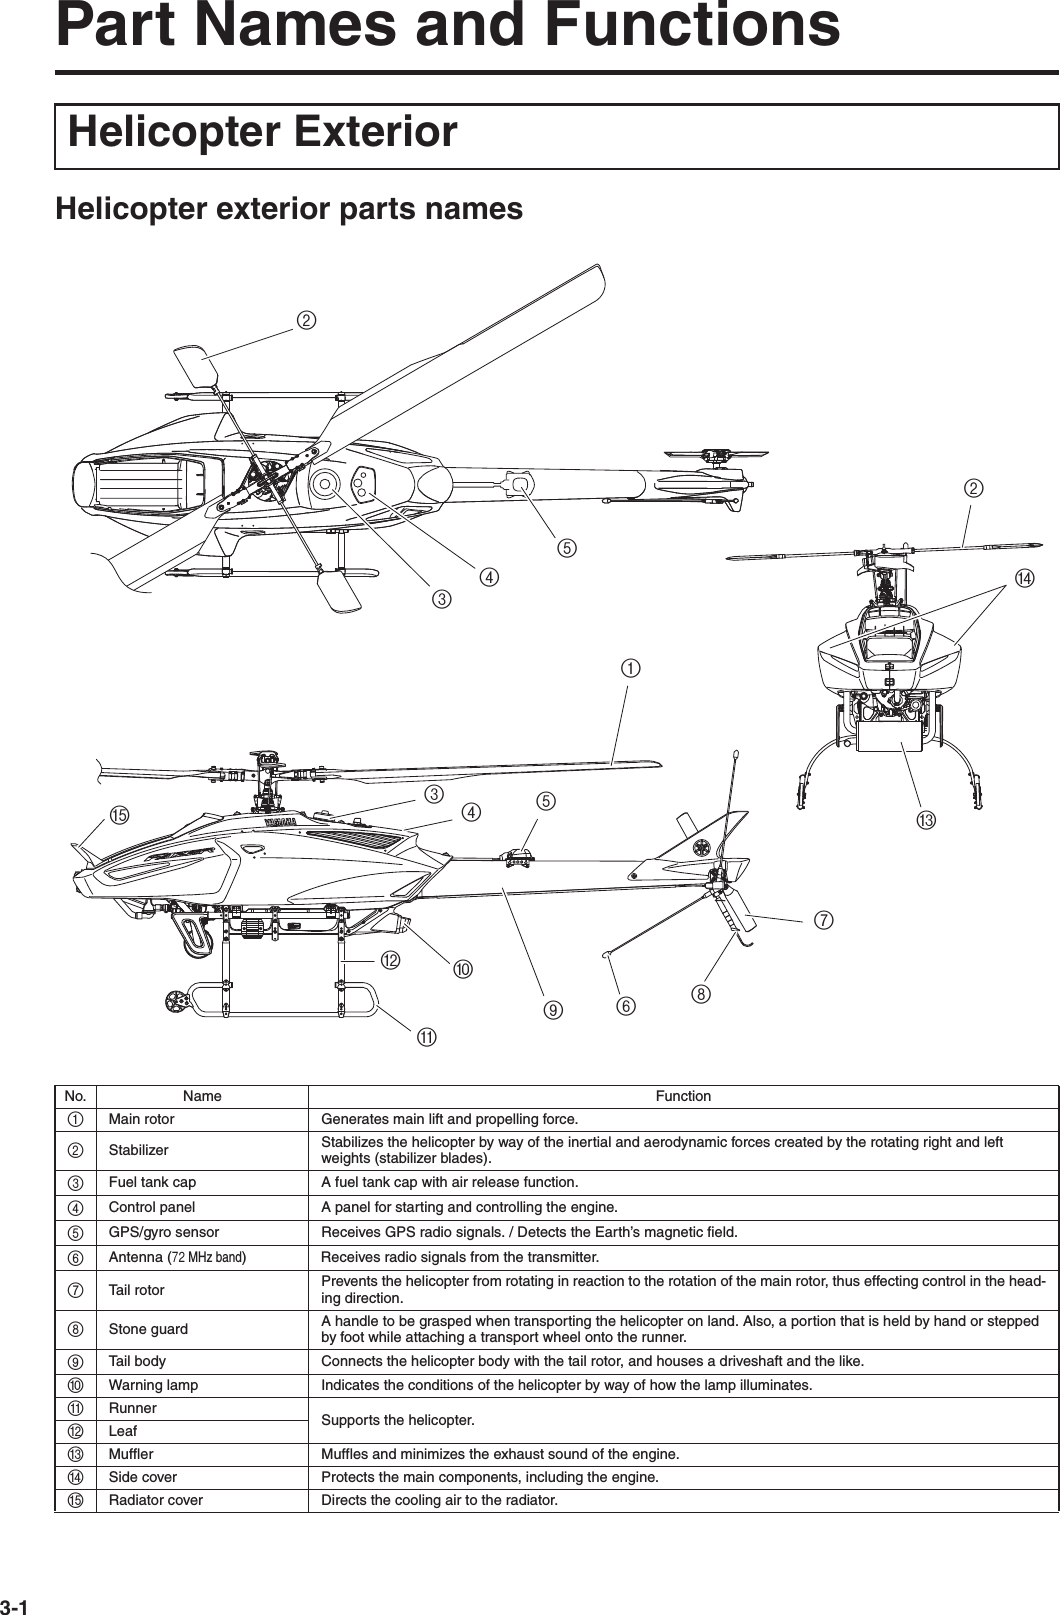 3-1Part Names and FunctionsHelicopter exterior parts namesHelicopter ExteriorNo. Name Function1Main rotor Generates main lift and propelling force.2Stabilizer Stabilizes the helicopter by way of the inertial and aerodynamic forces created by the rotating right and left weights (stabilizer blades).3Fuel tank cap A fuel tank cap with air release function.4Control panel A panel for starting and controlling the engine.5GPS/gyro sensor Receives GPS radio signals. / Detects the Earth’s magnetic field.6Antenna (72 MHz band) Receives radio signals from the transmitter.7Tail rotor Prevents the helicopter from rotating in reaction to the rotation of the main rotor, thus effecting control in the head-ing direction.8Stone guard A handle to be grasped when transporting the helicopter on land. Also, a portion that is held by hand or stepped by foot while attaching a transport wheel onto the runner.9Tail body Connects the helicopter body with the tail rotor, and houses a driveshaft and the like.0Warning lamp Indicates the conditions of the helicopter by way of how the lamp illuminates.ARunner Supports the helicopter.BLeafCMuffler Muffles and minimizes the exhaust sound of the engine.DSide cover Protects the main components, including the engine.ERadiator cover Directs the cooling air to the radiator.234DC7?8956B0EA34521